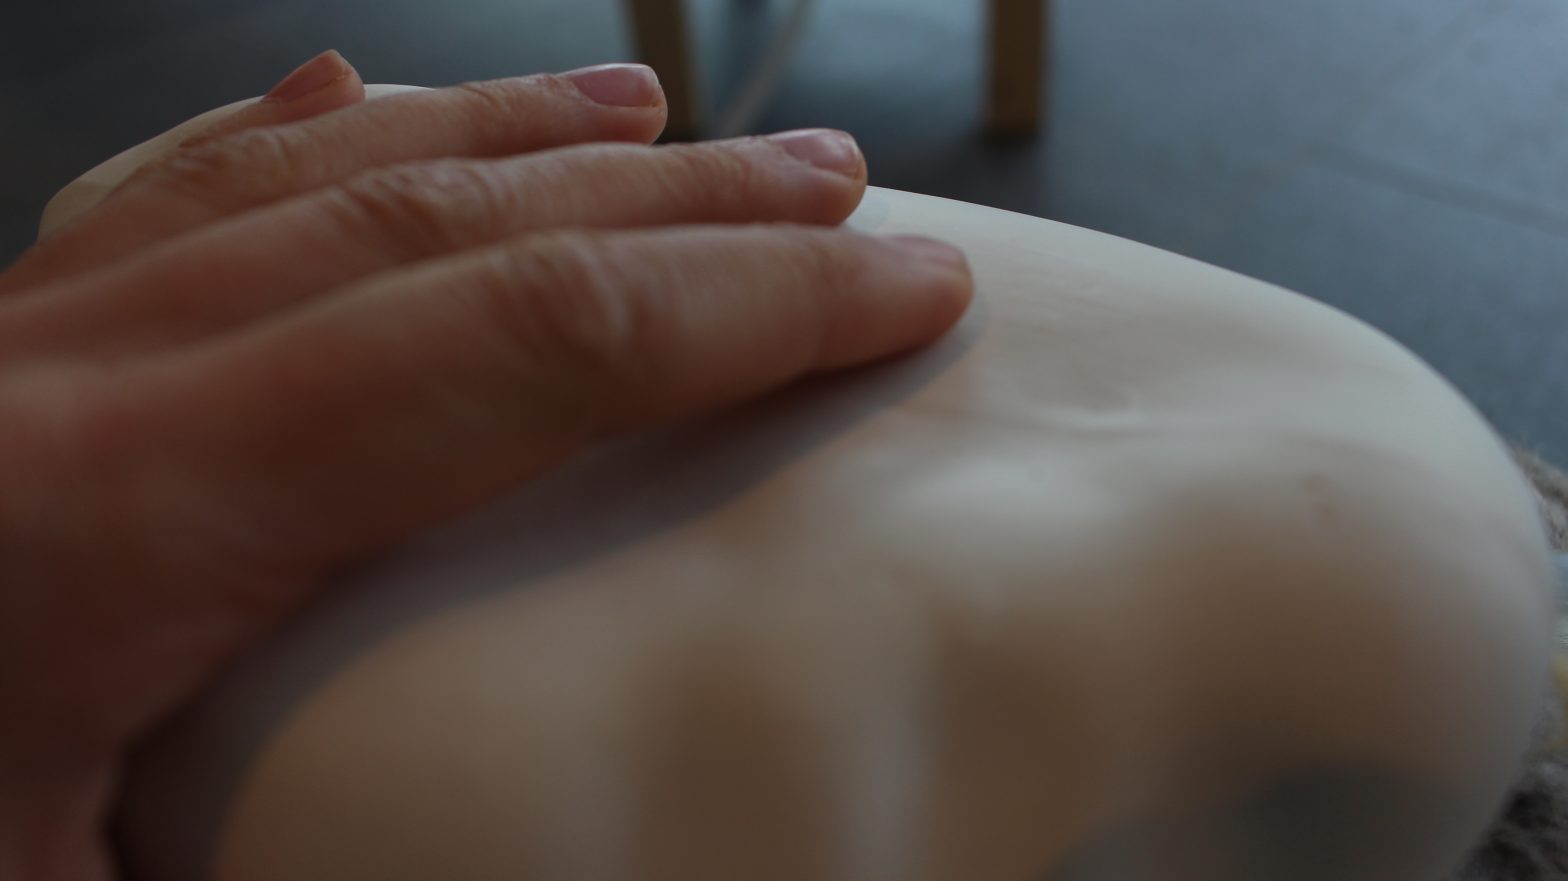 Image of a hand resting upon a white organic sculptural form